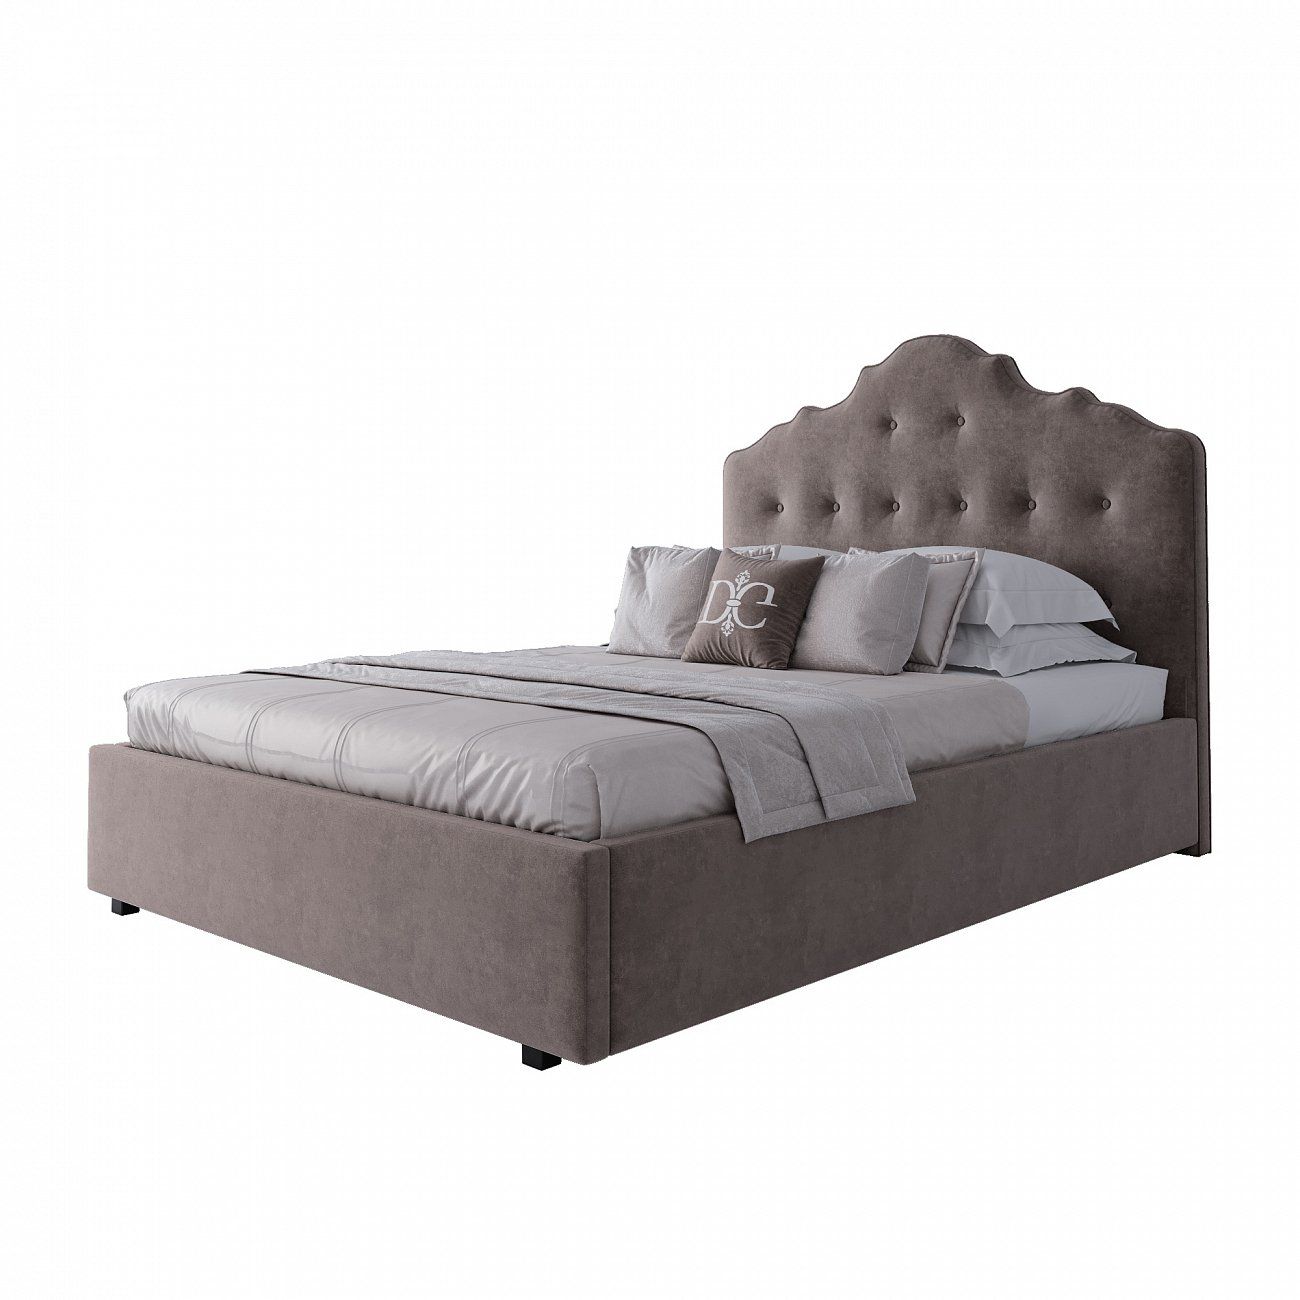 Semi-double teenage bed with a soft headboard 140x200 cm gray-brown Palace